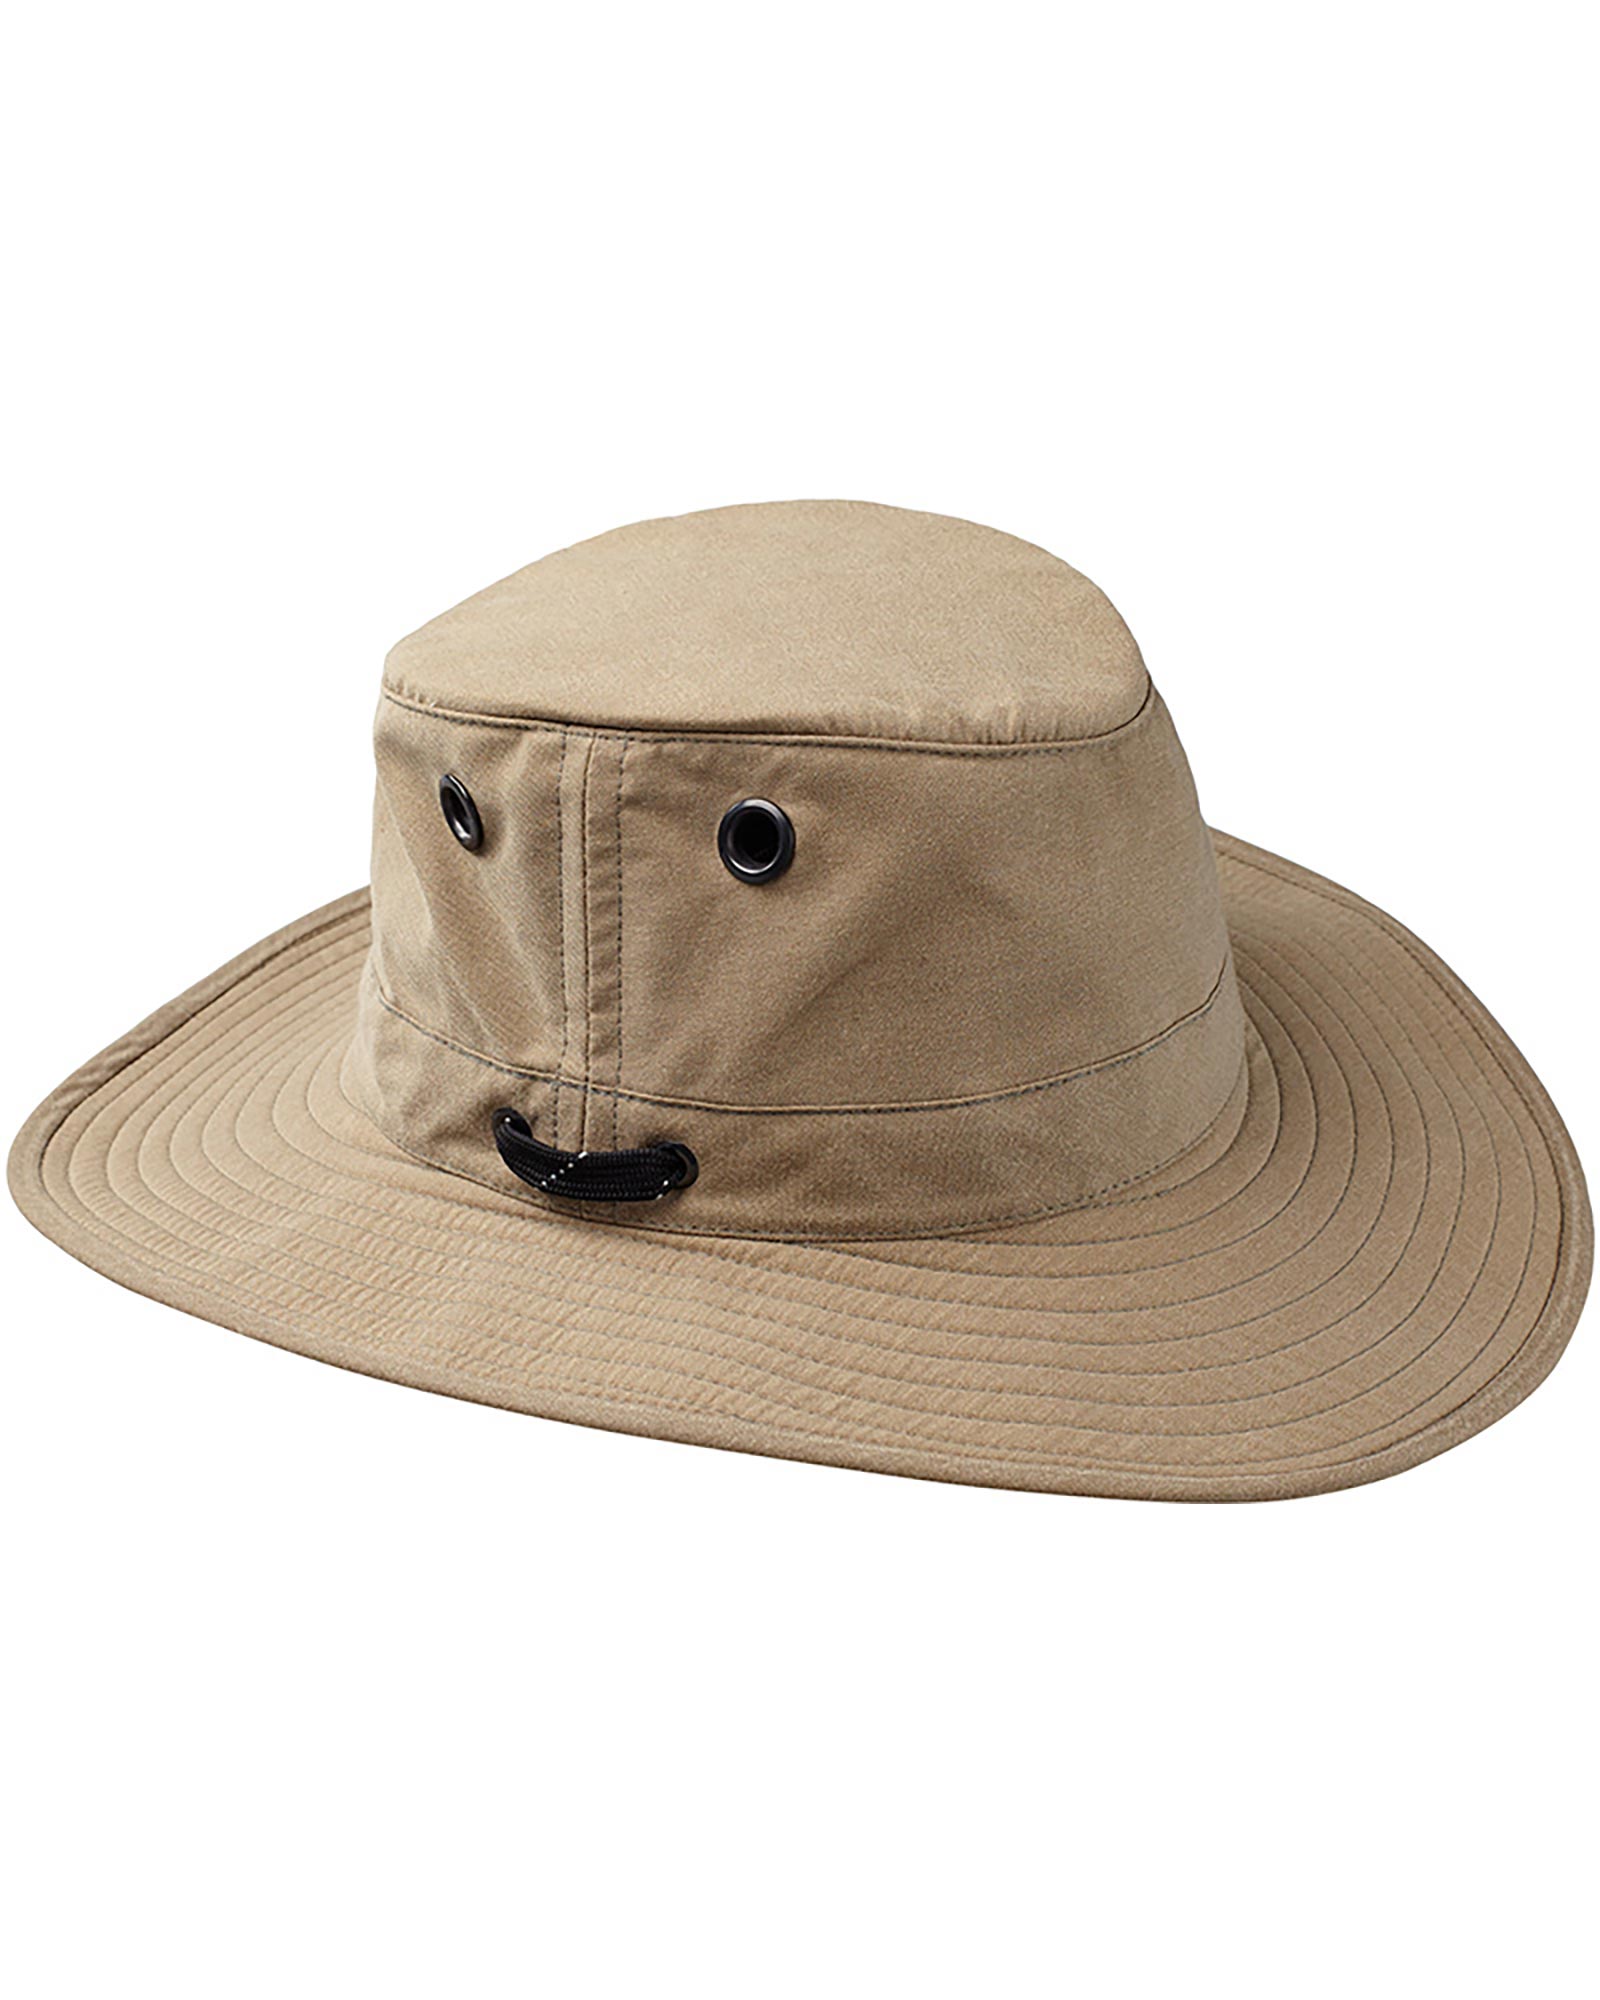 Tilley Waxed Cotton Hat - Tan 7 1/8